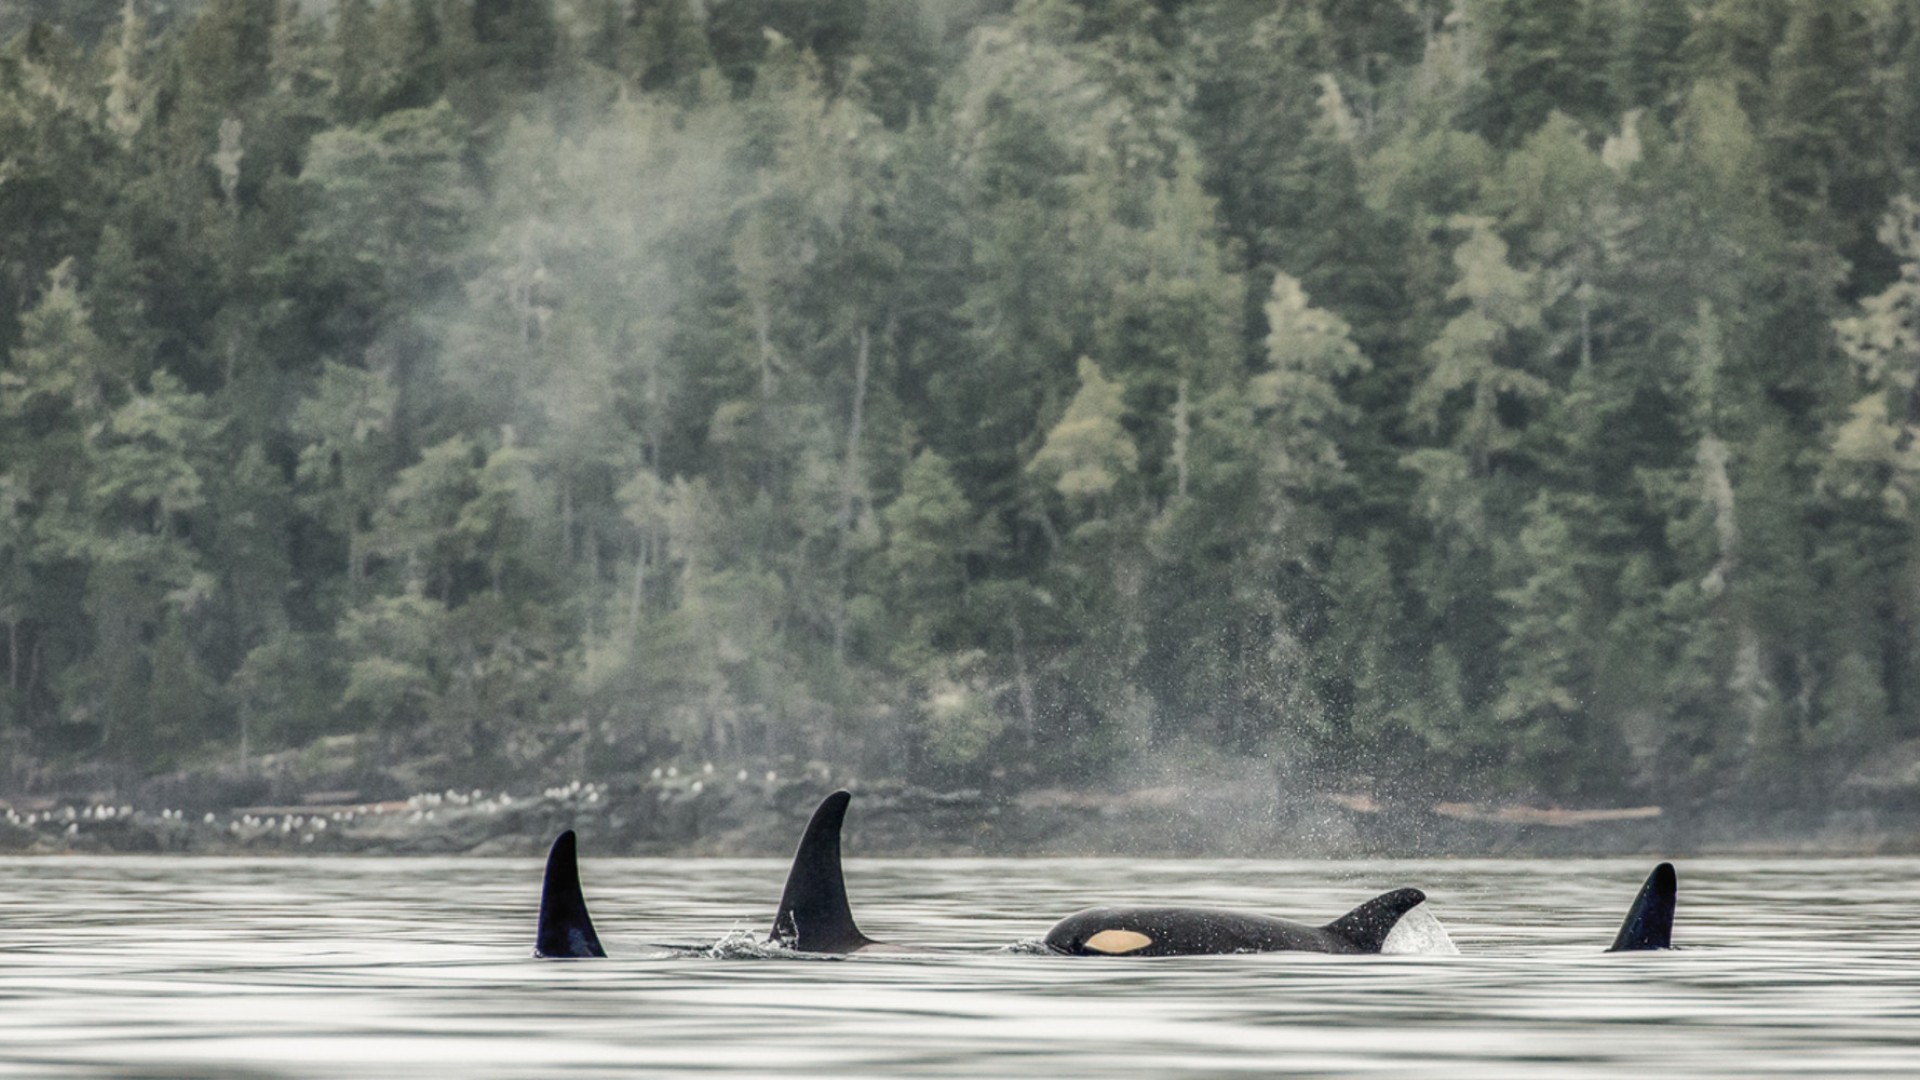 Orcas breaching the water on a misty morning in British Columbia